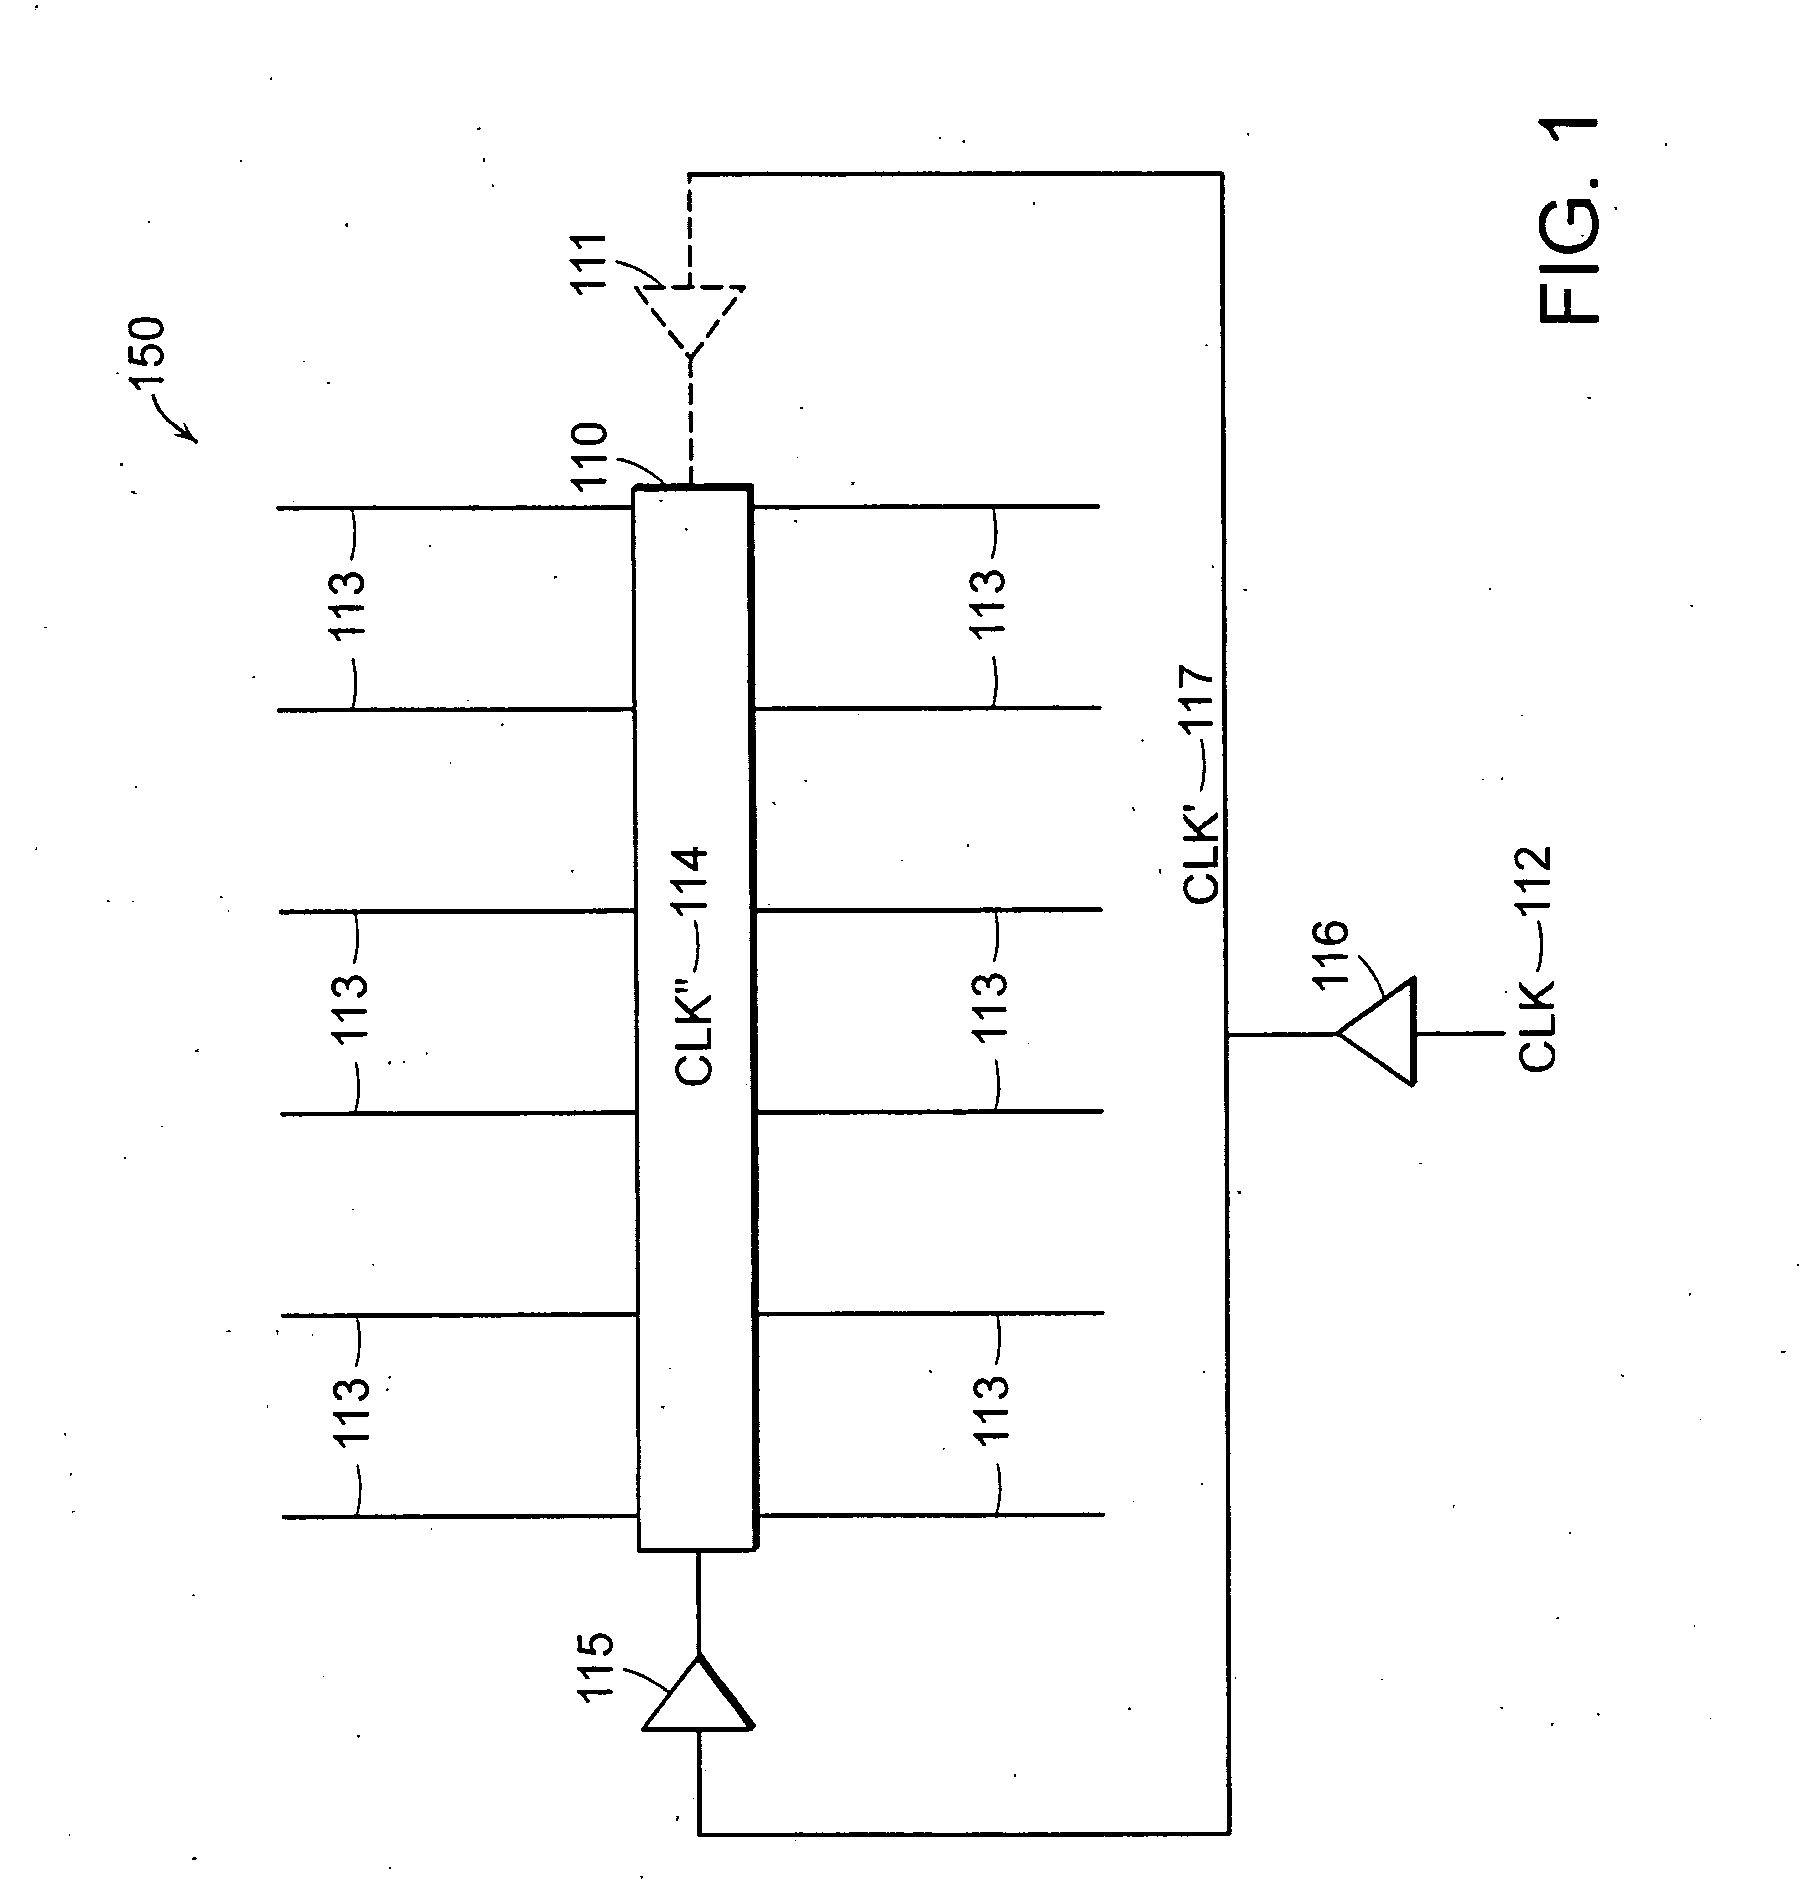 ASIC design using clock and power grid standard cell